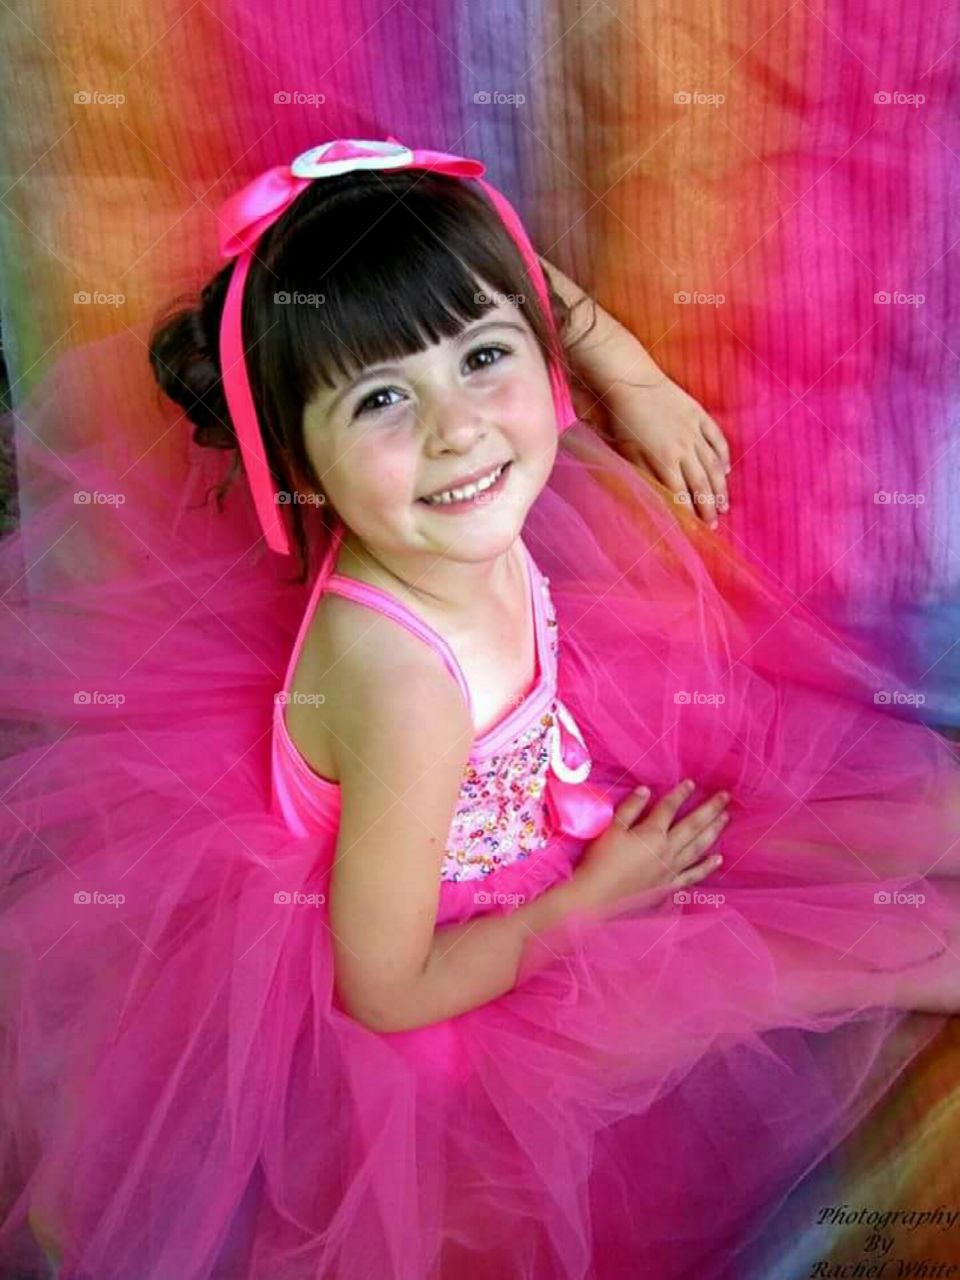 Little girl dressed for dance recital with a smile